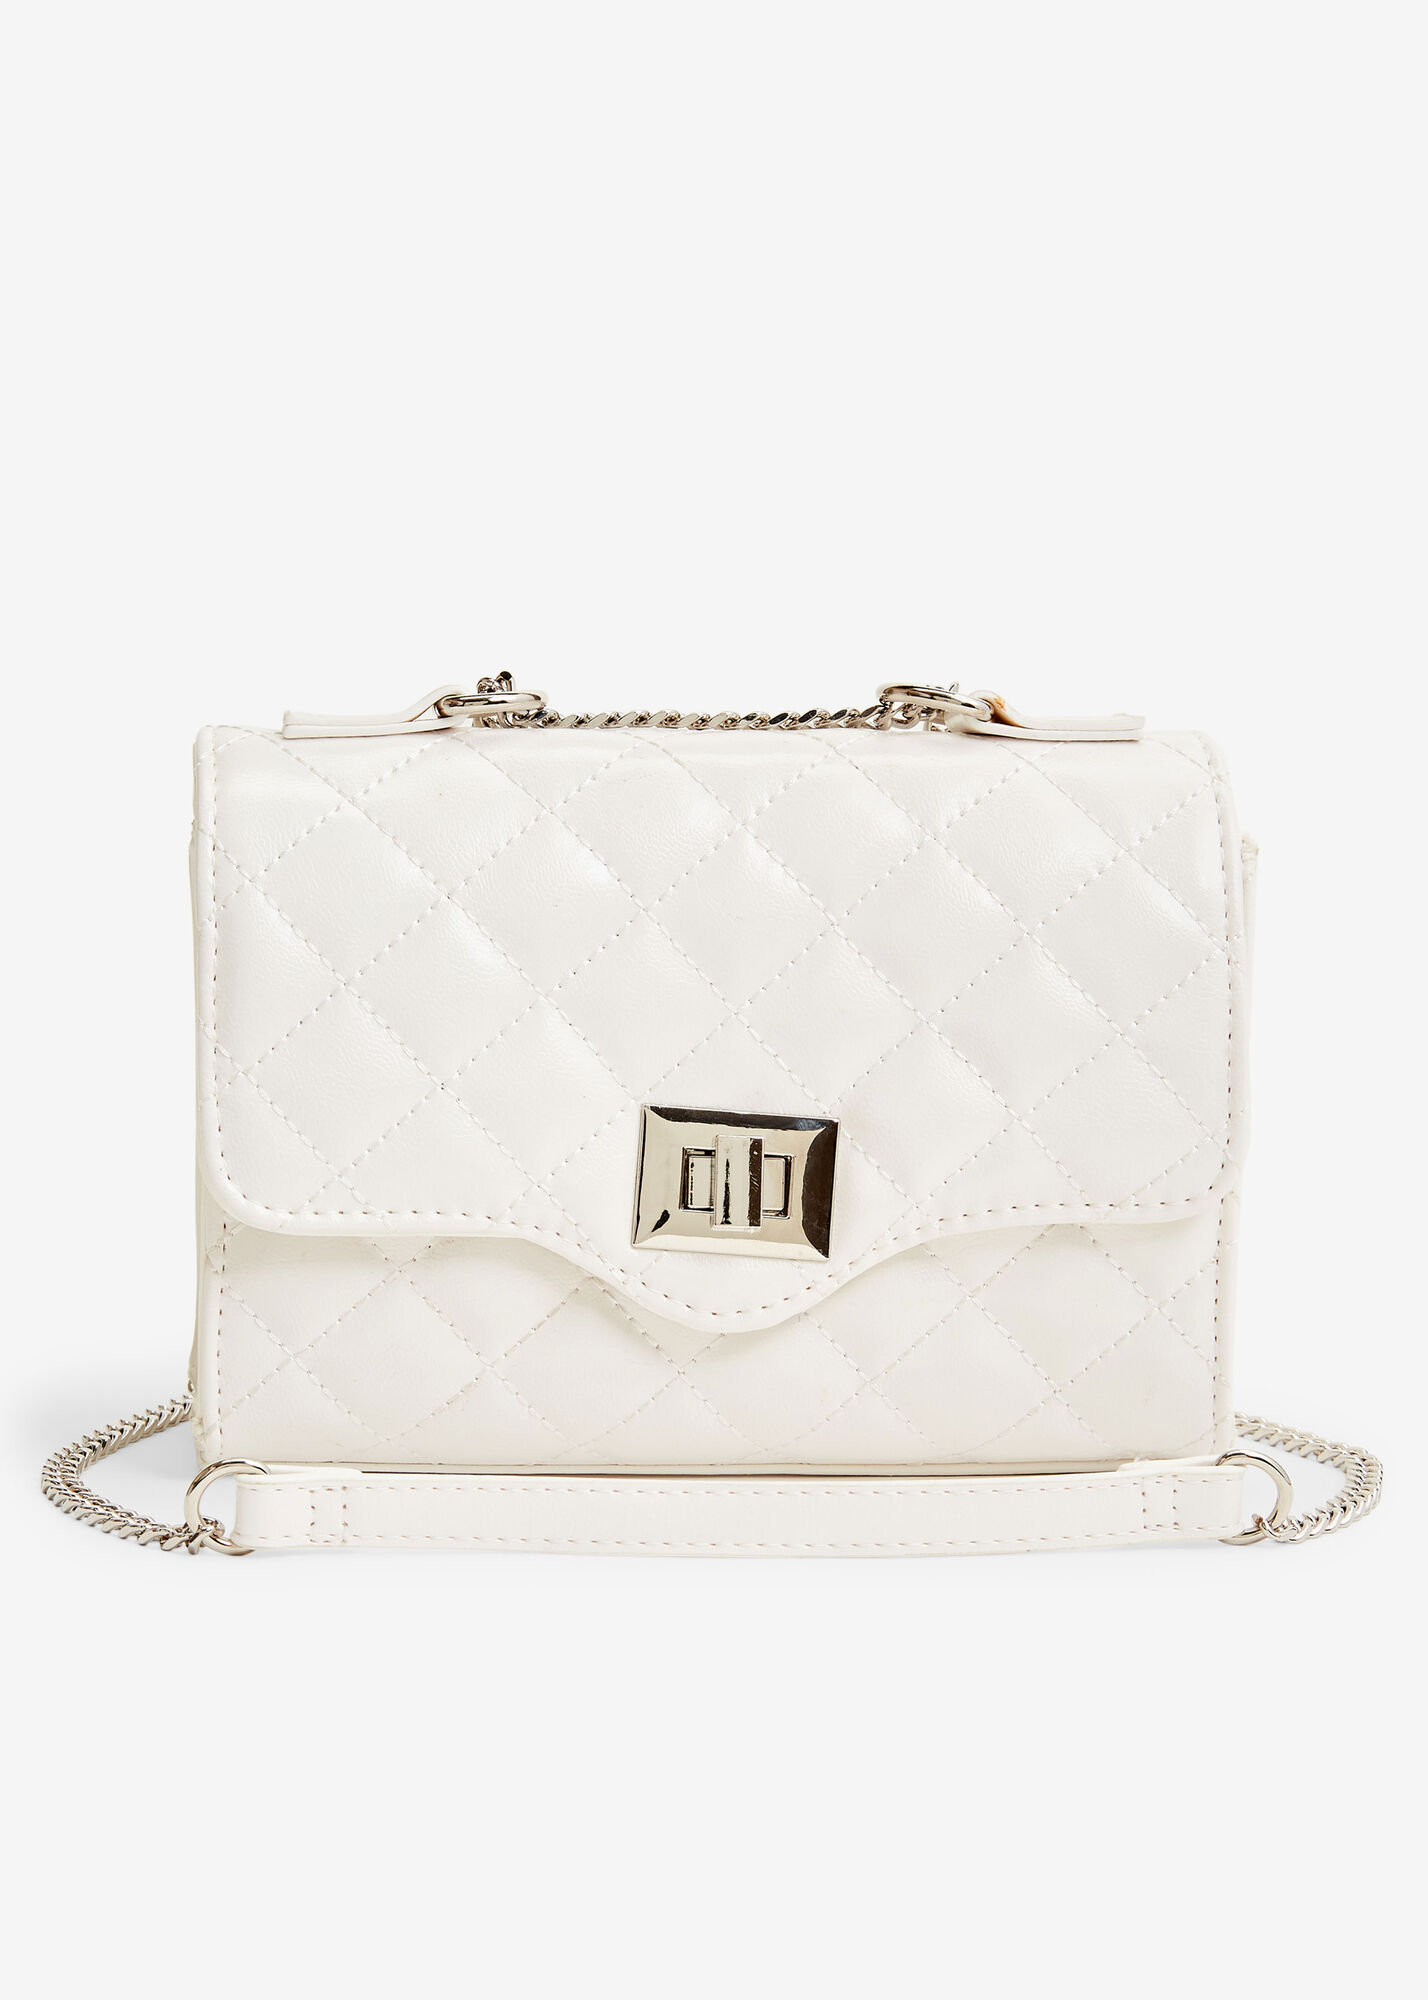 Steve Madden Bdaisy Quilted Crossbody Bag (Various Colors) only $49.72